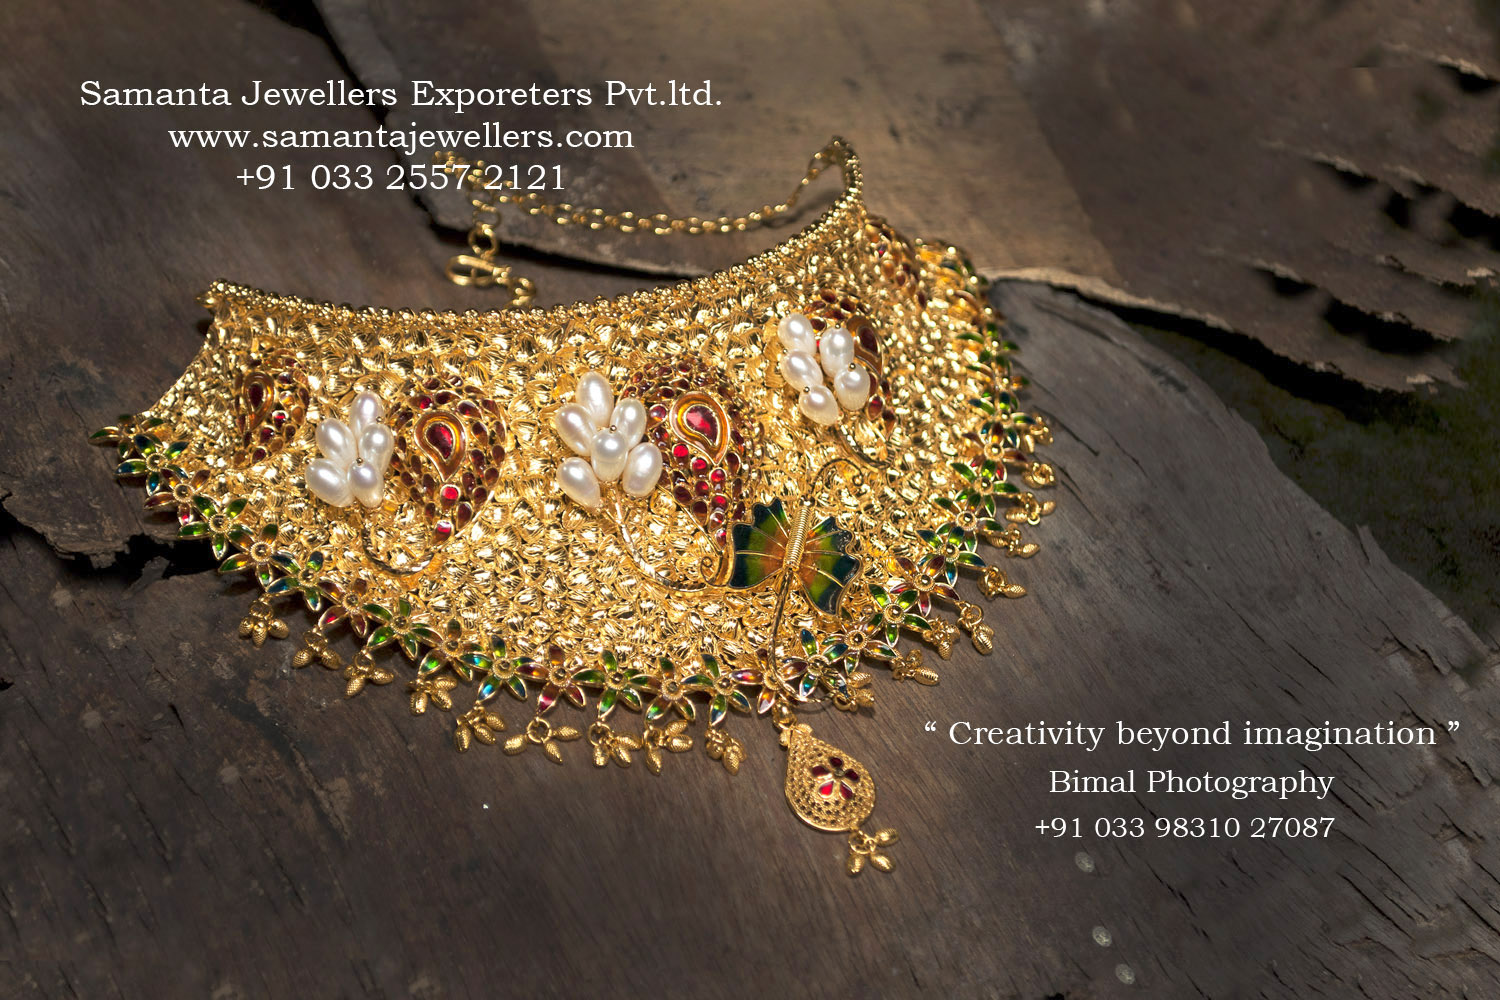 product photography, product shot, jewelry photography, jewellery photo, jewelry photoshoot, necklace photography, earring photography, jewellery photographer, jewelry product photography, product photoshot,